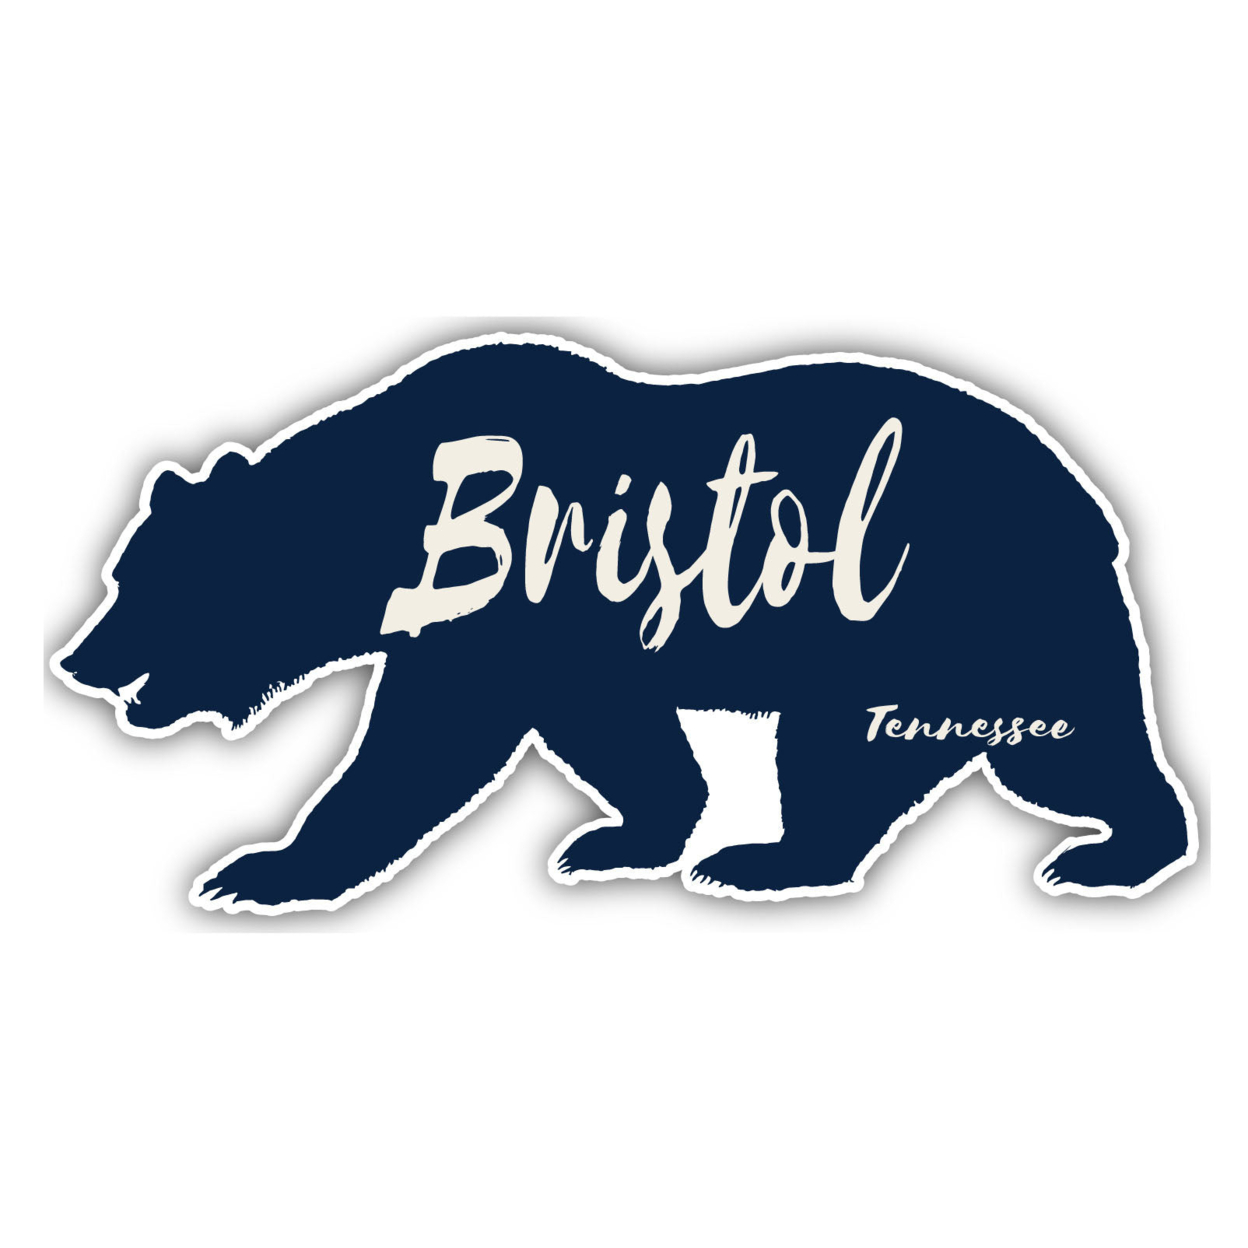 Bristol Tennessee Souvenir Decorative Stickers (Choose Theme And Size) - 4-Pack, 2-Inch, Bear